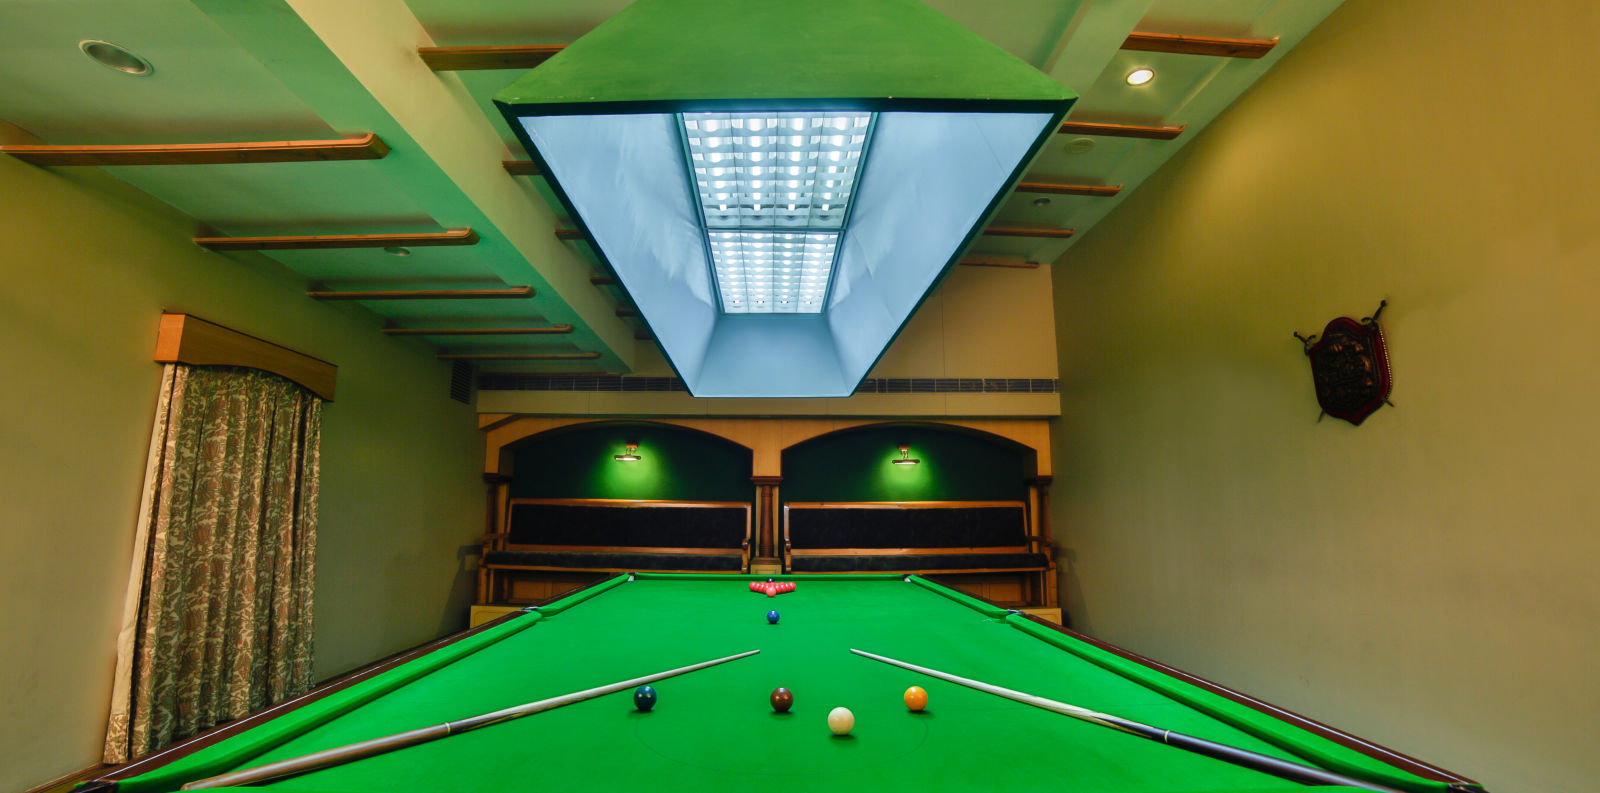 pool table with billiards cue sticks placed at the corners at Hotel Tara, Hyderabad